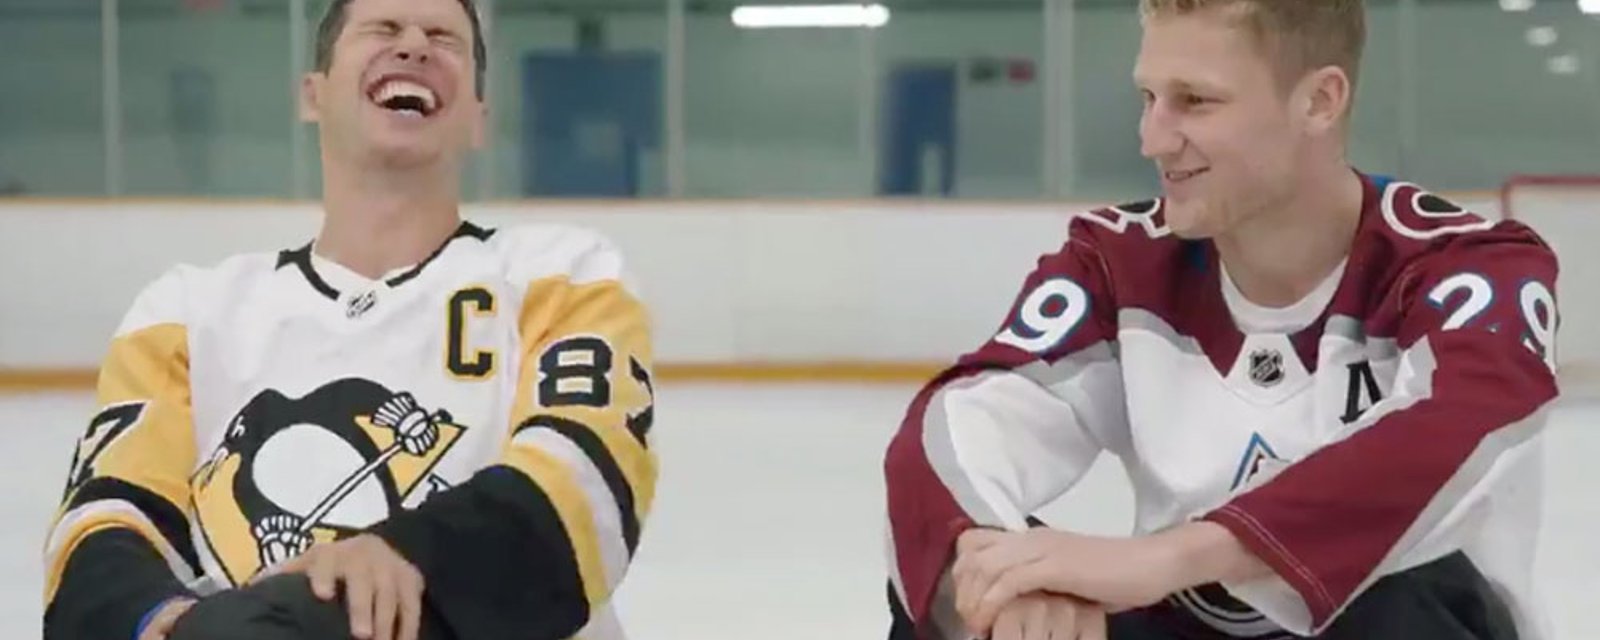 Crosby and MacKinnon ask kids how to make hockey more fun and are stunned by answers 